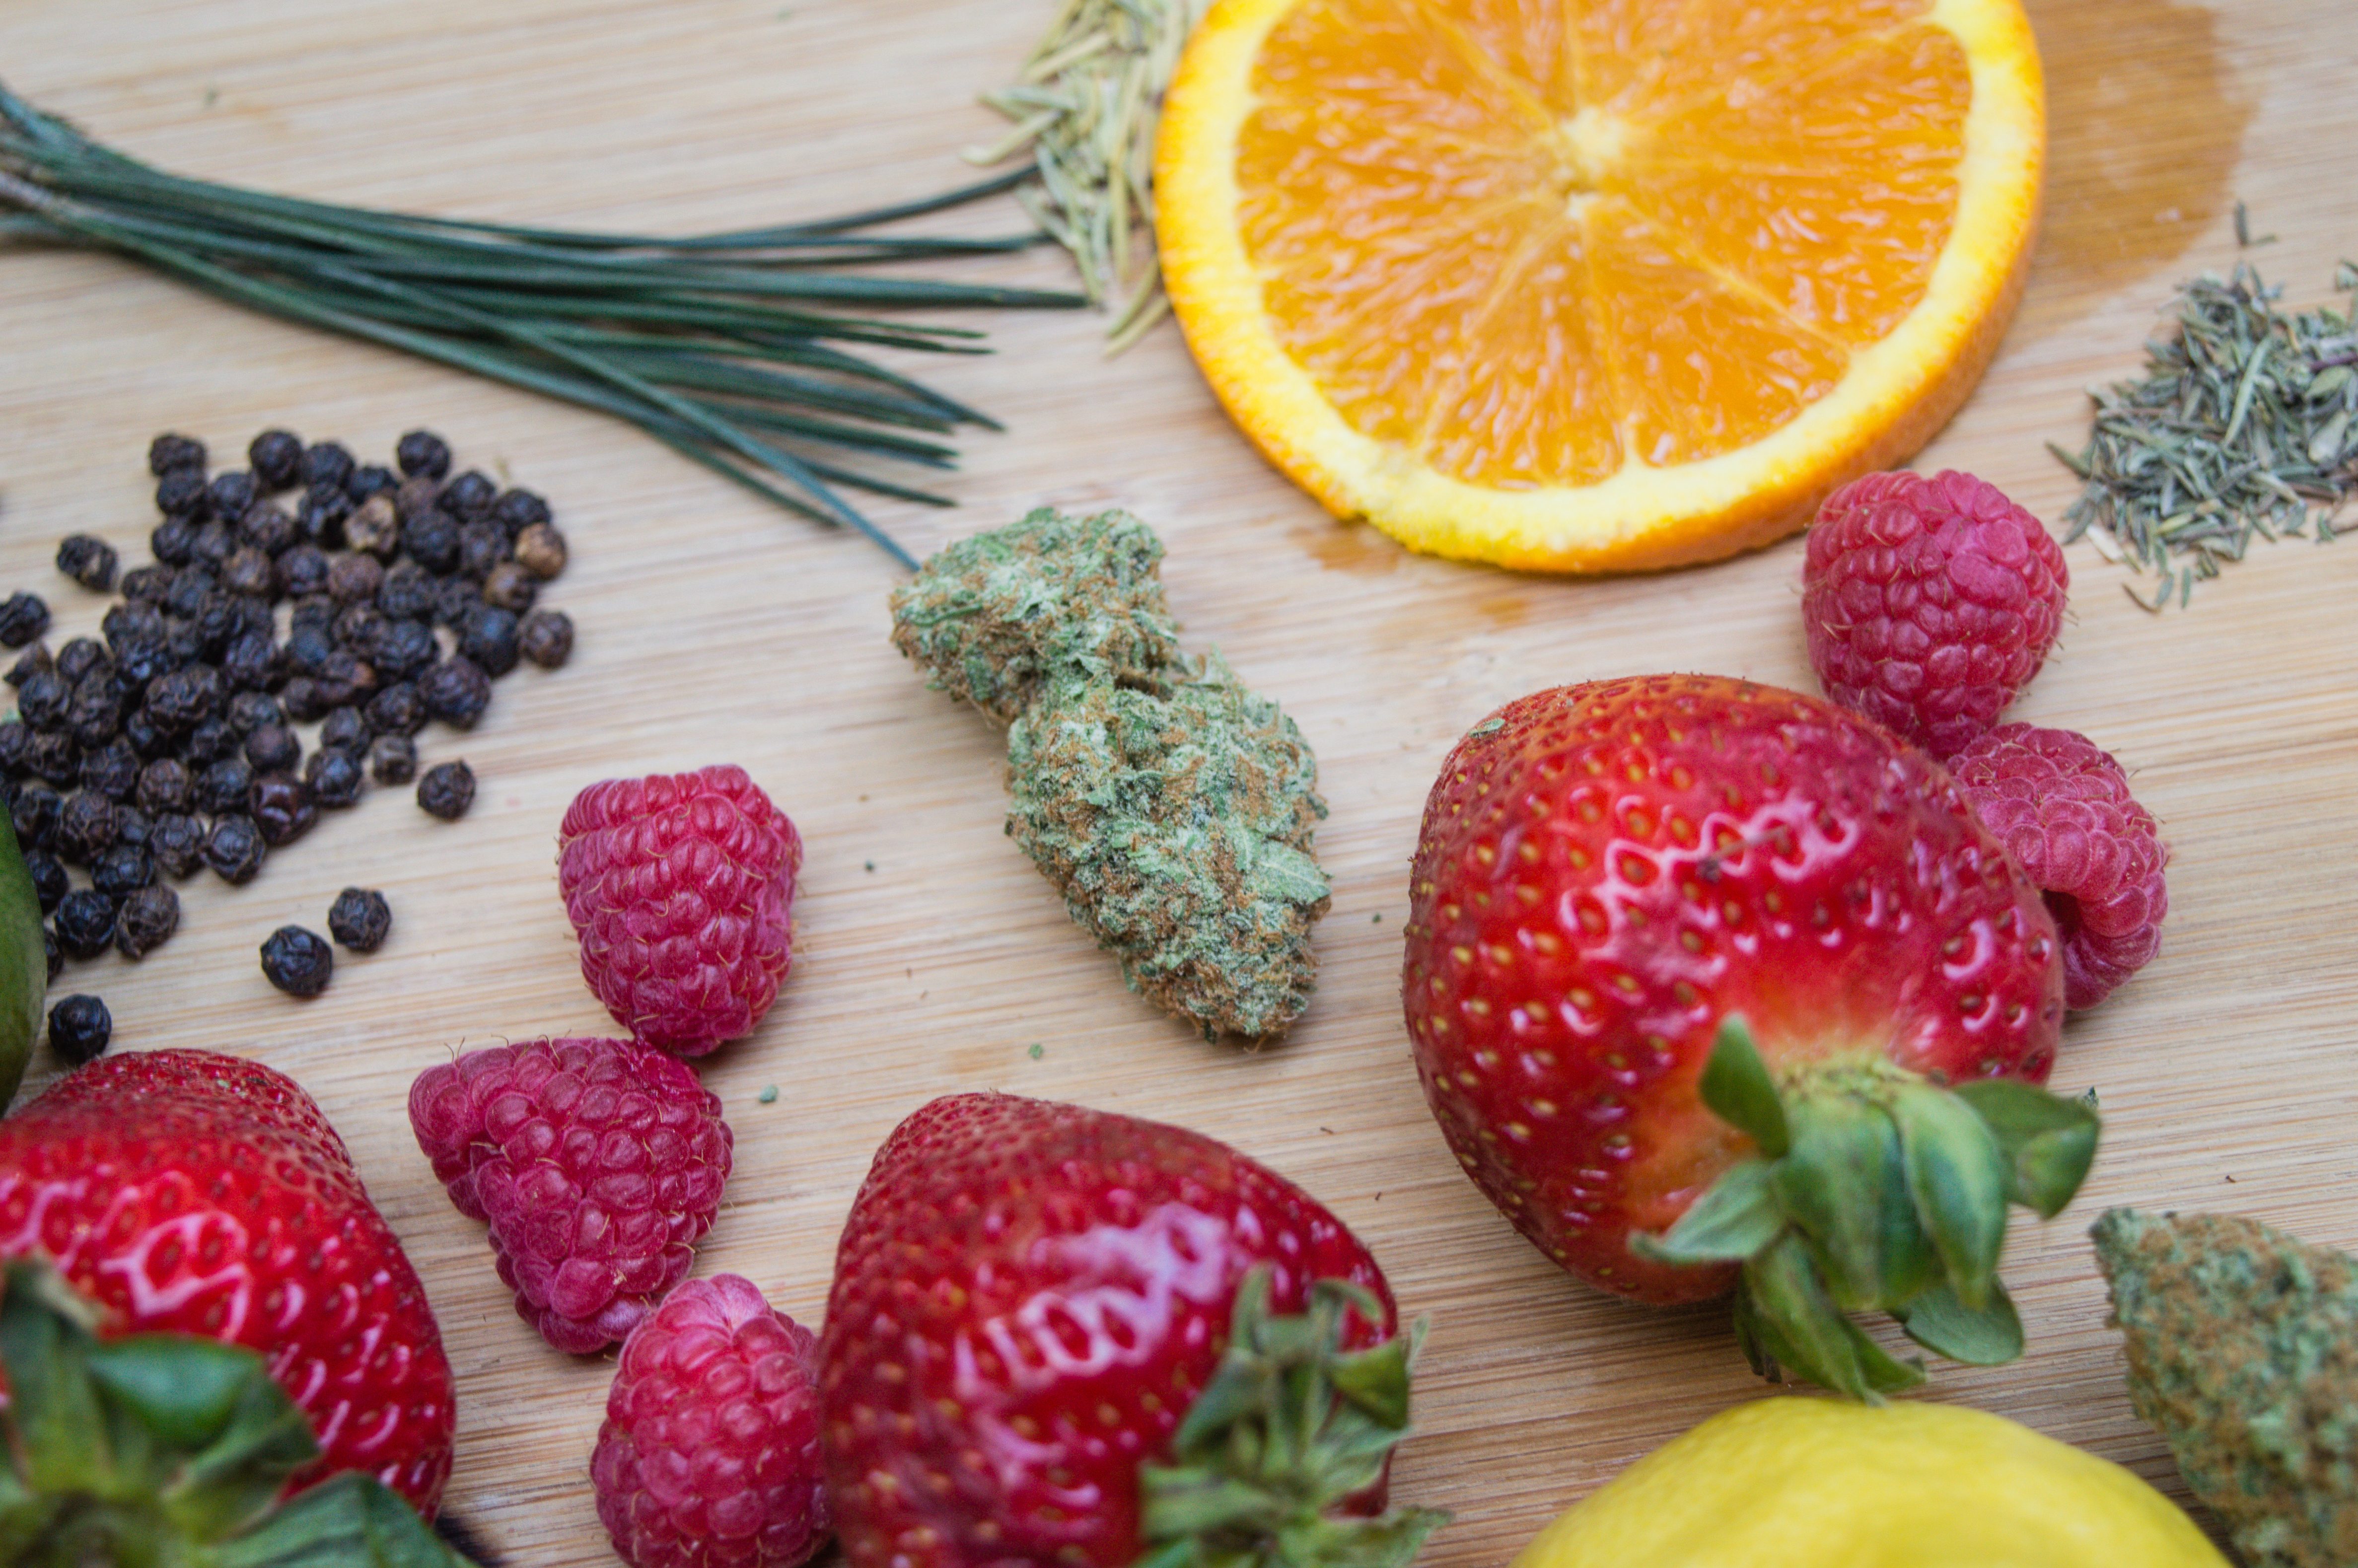 A Cannabis bud sits on a cutting board surrounded by strawberries, diced orange, raspberries, peppercorn and pine.